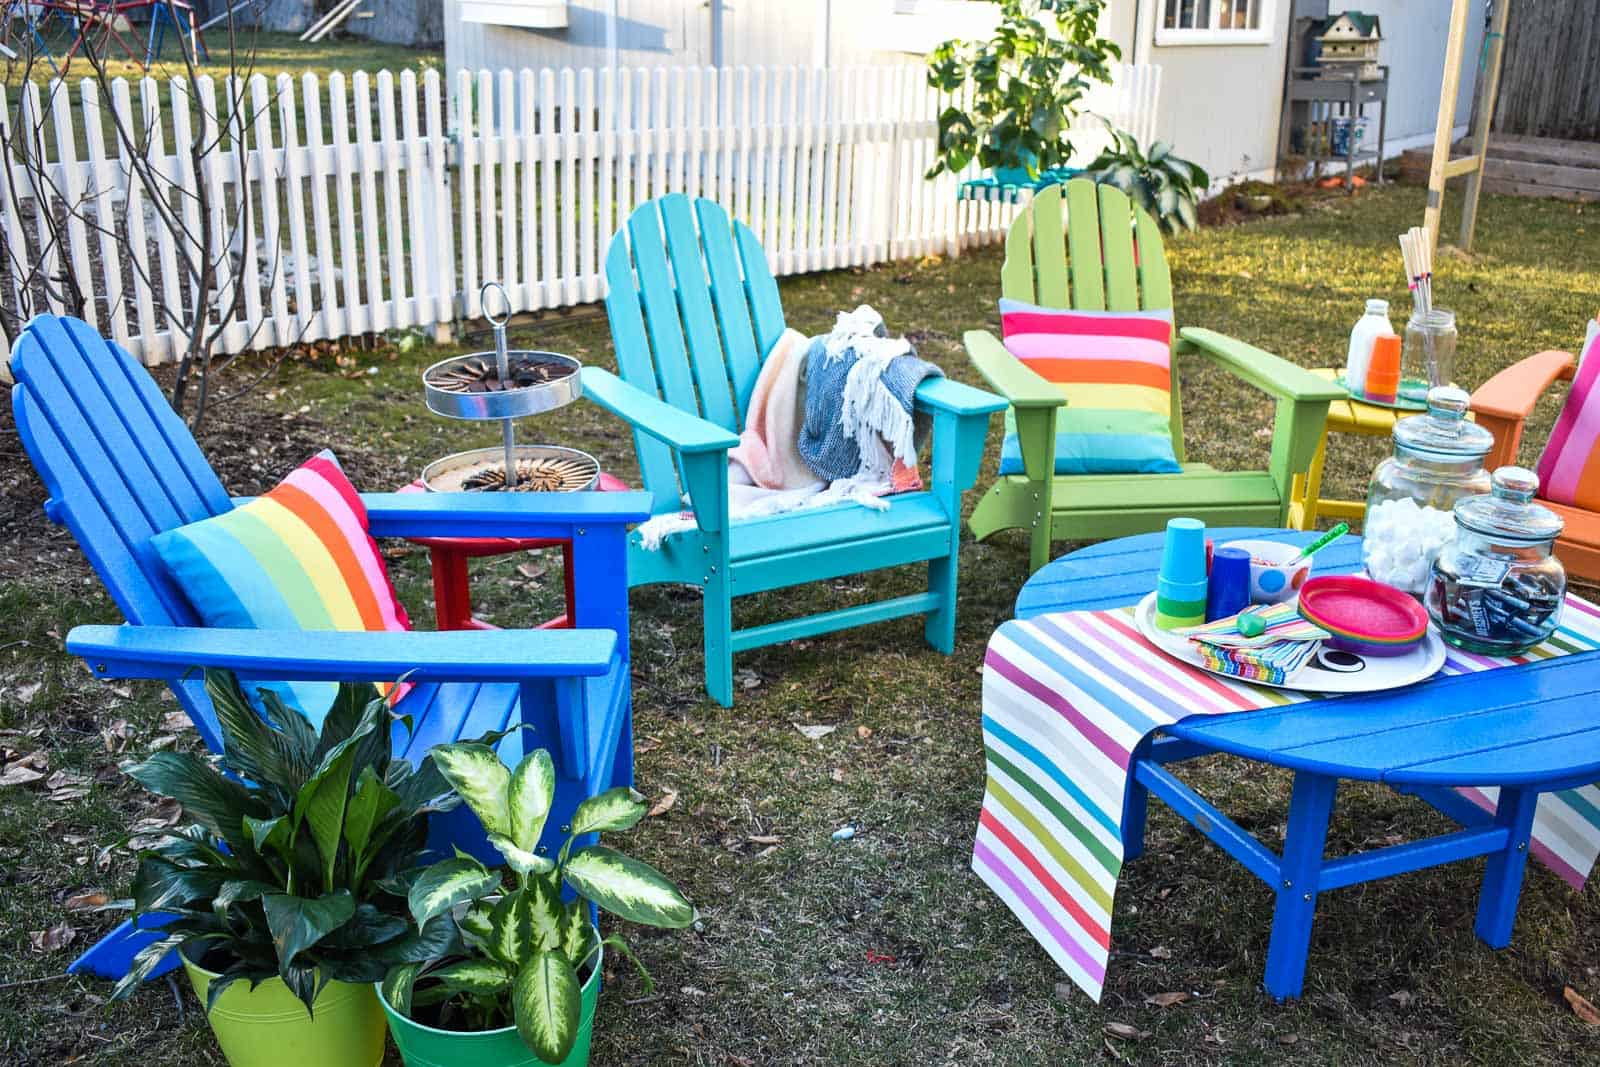 Colorful Patio Furniture and S'mores - At Charlotte's House